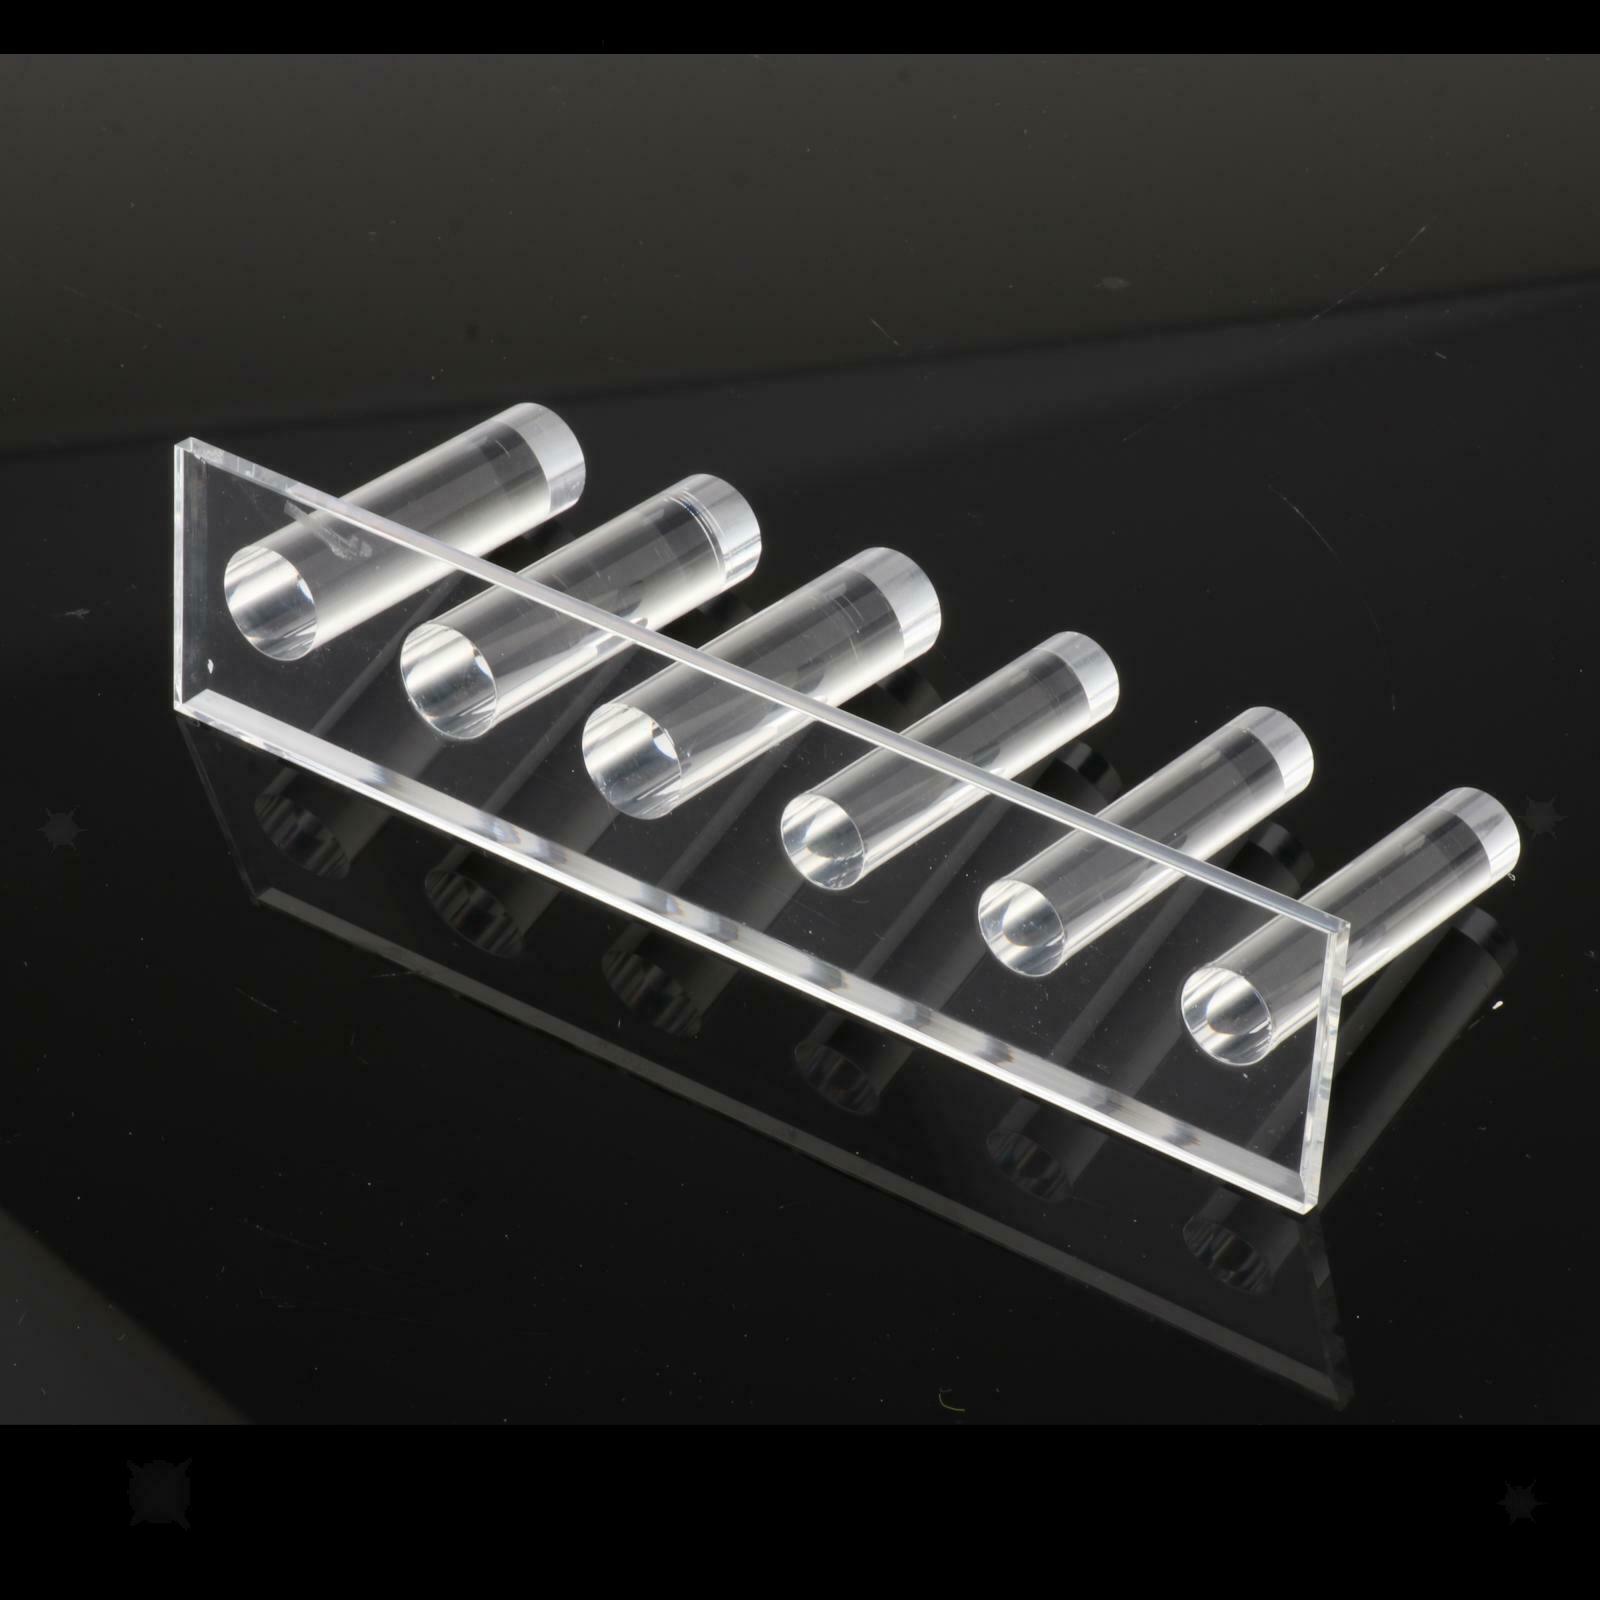 Acrylic Finger Ring Display Counter Organizer Holder for Shows Wedding Ring